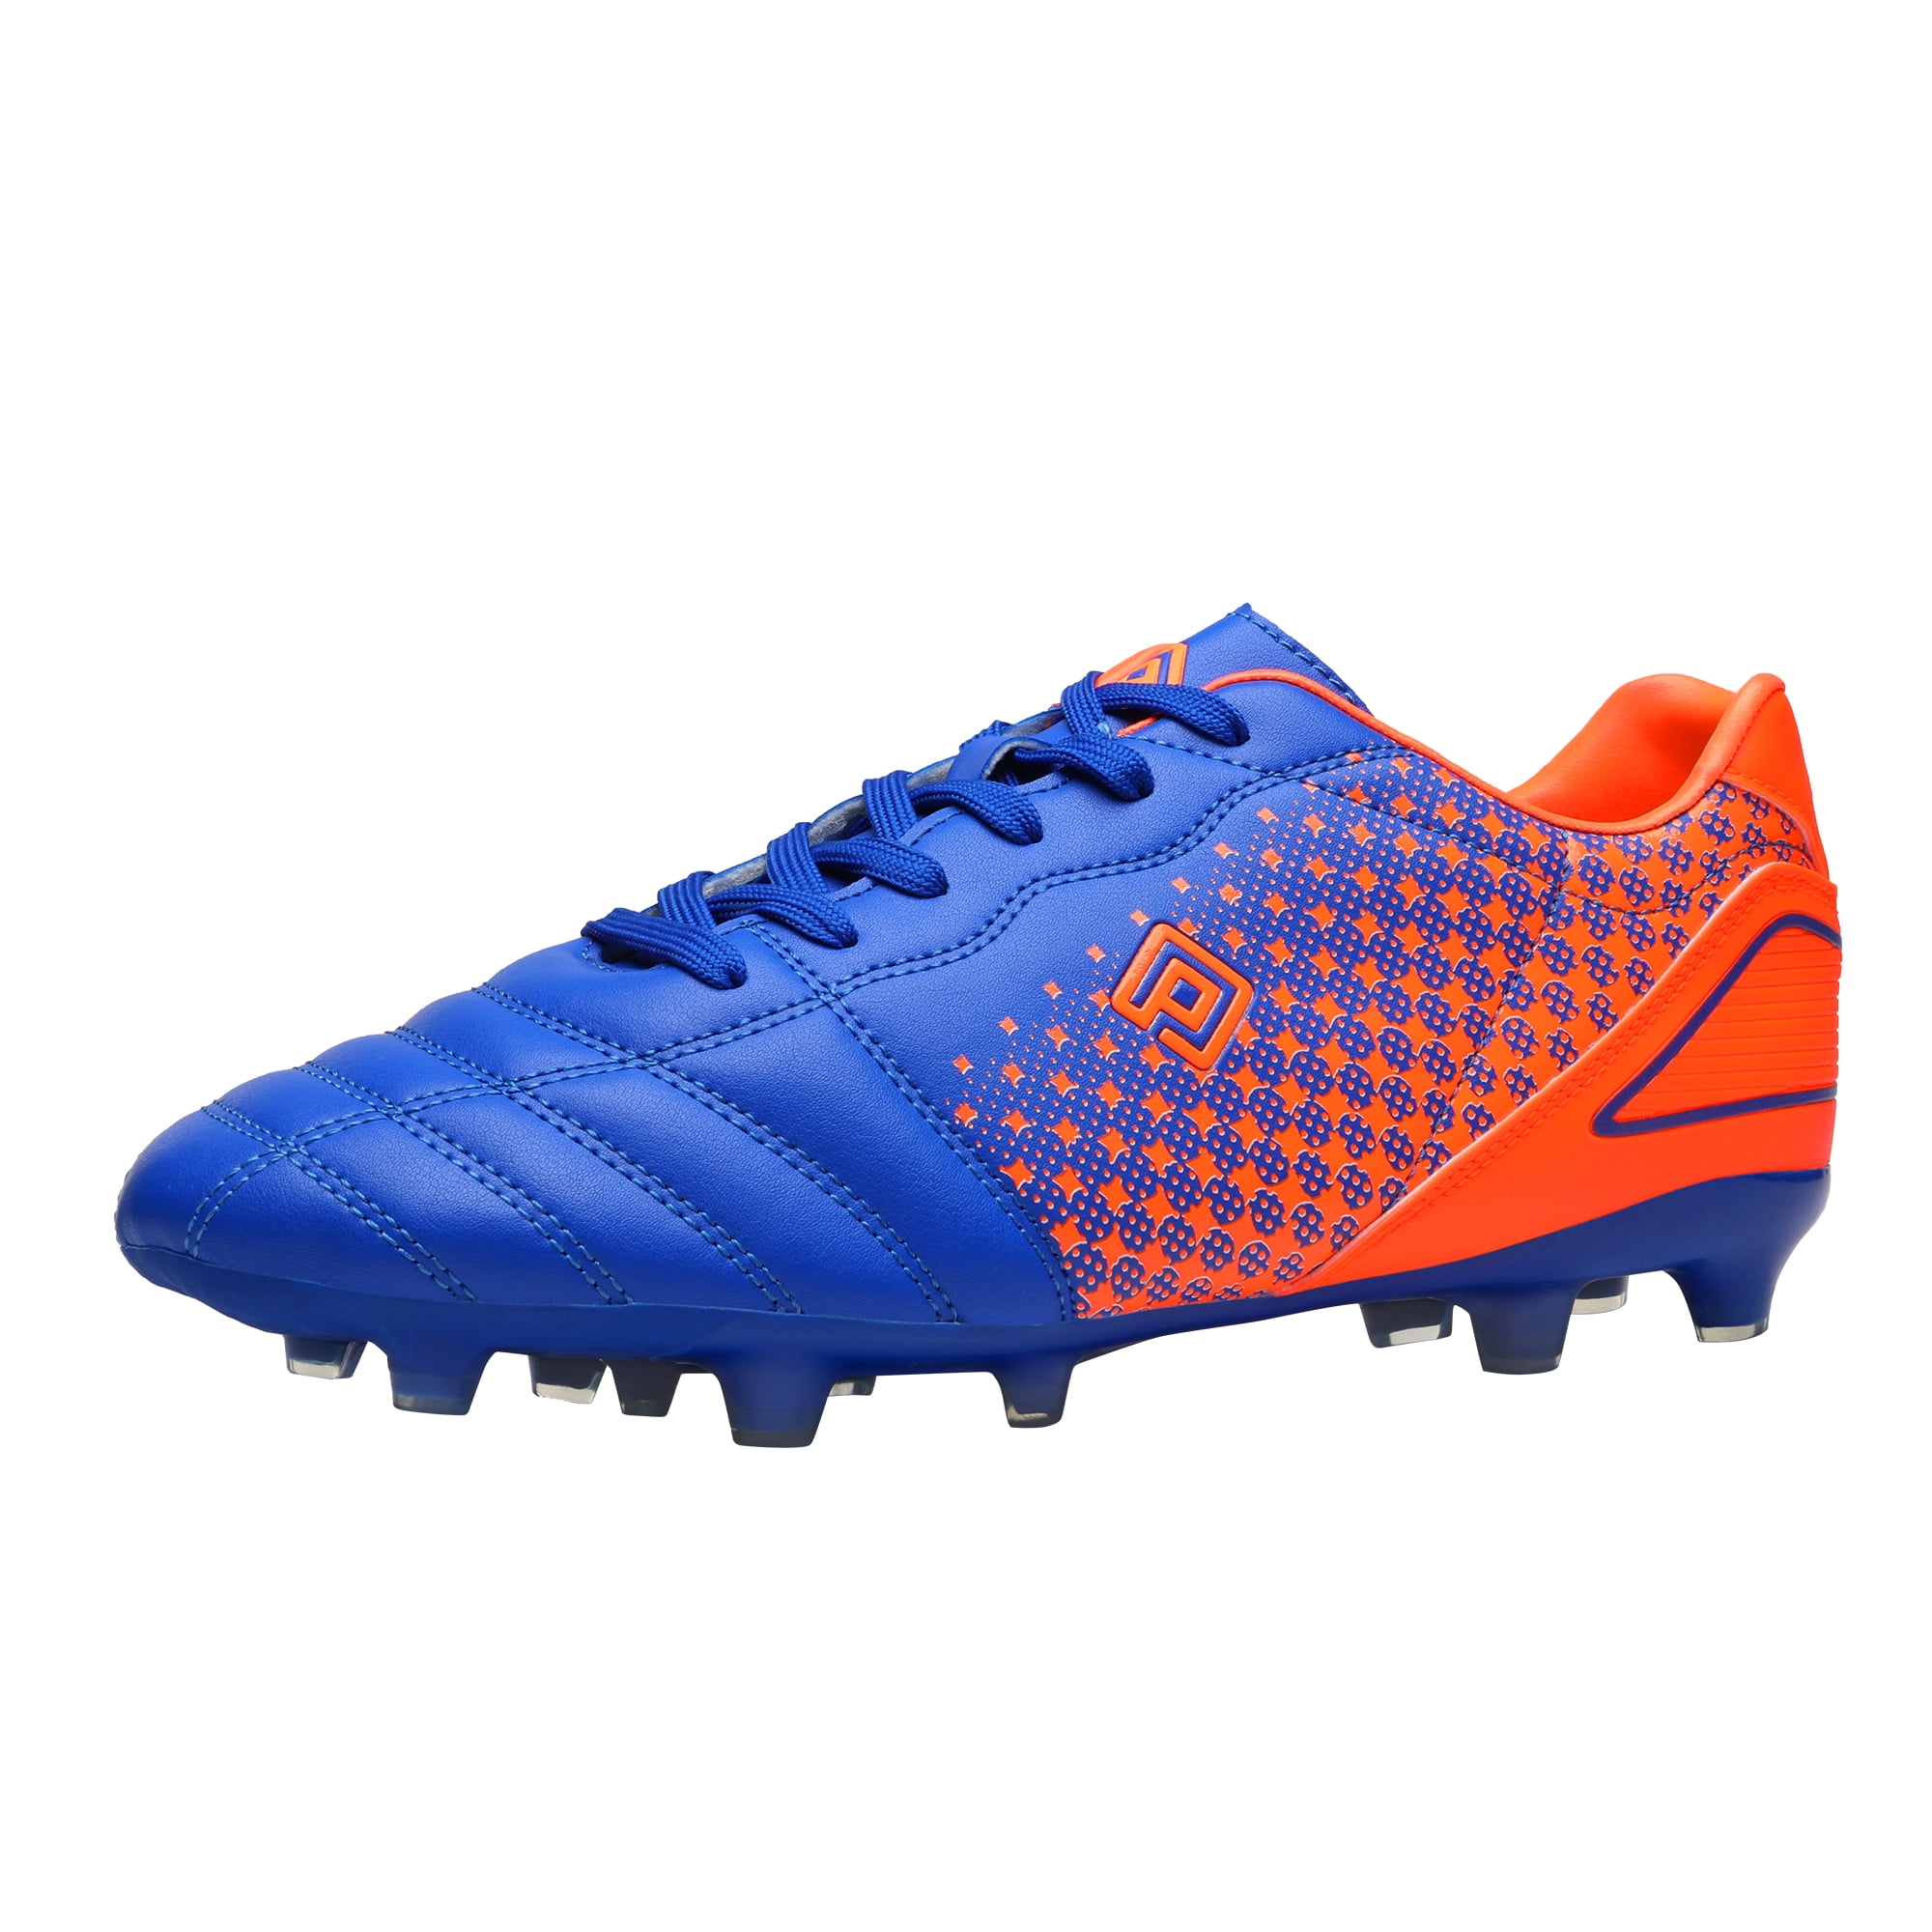 DREAM PAIRS Mens Boys Soccer Shoes Football Shoes Firm Ground Soccer Cleats 